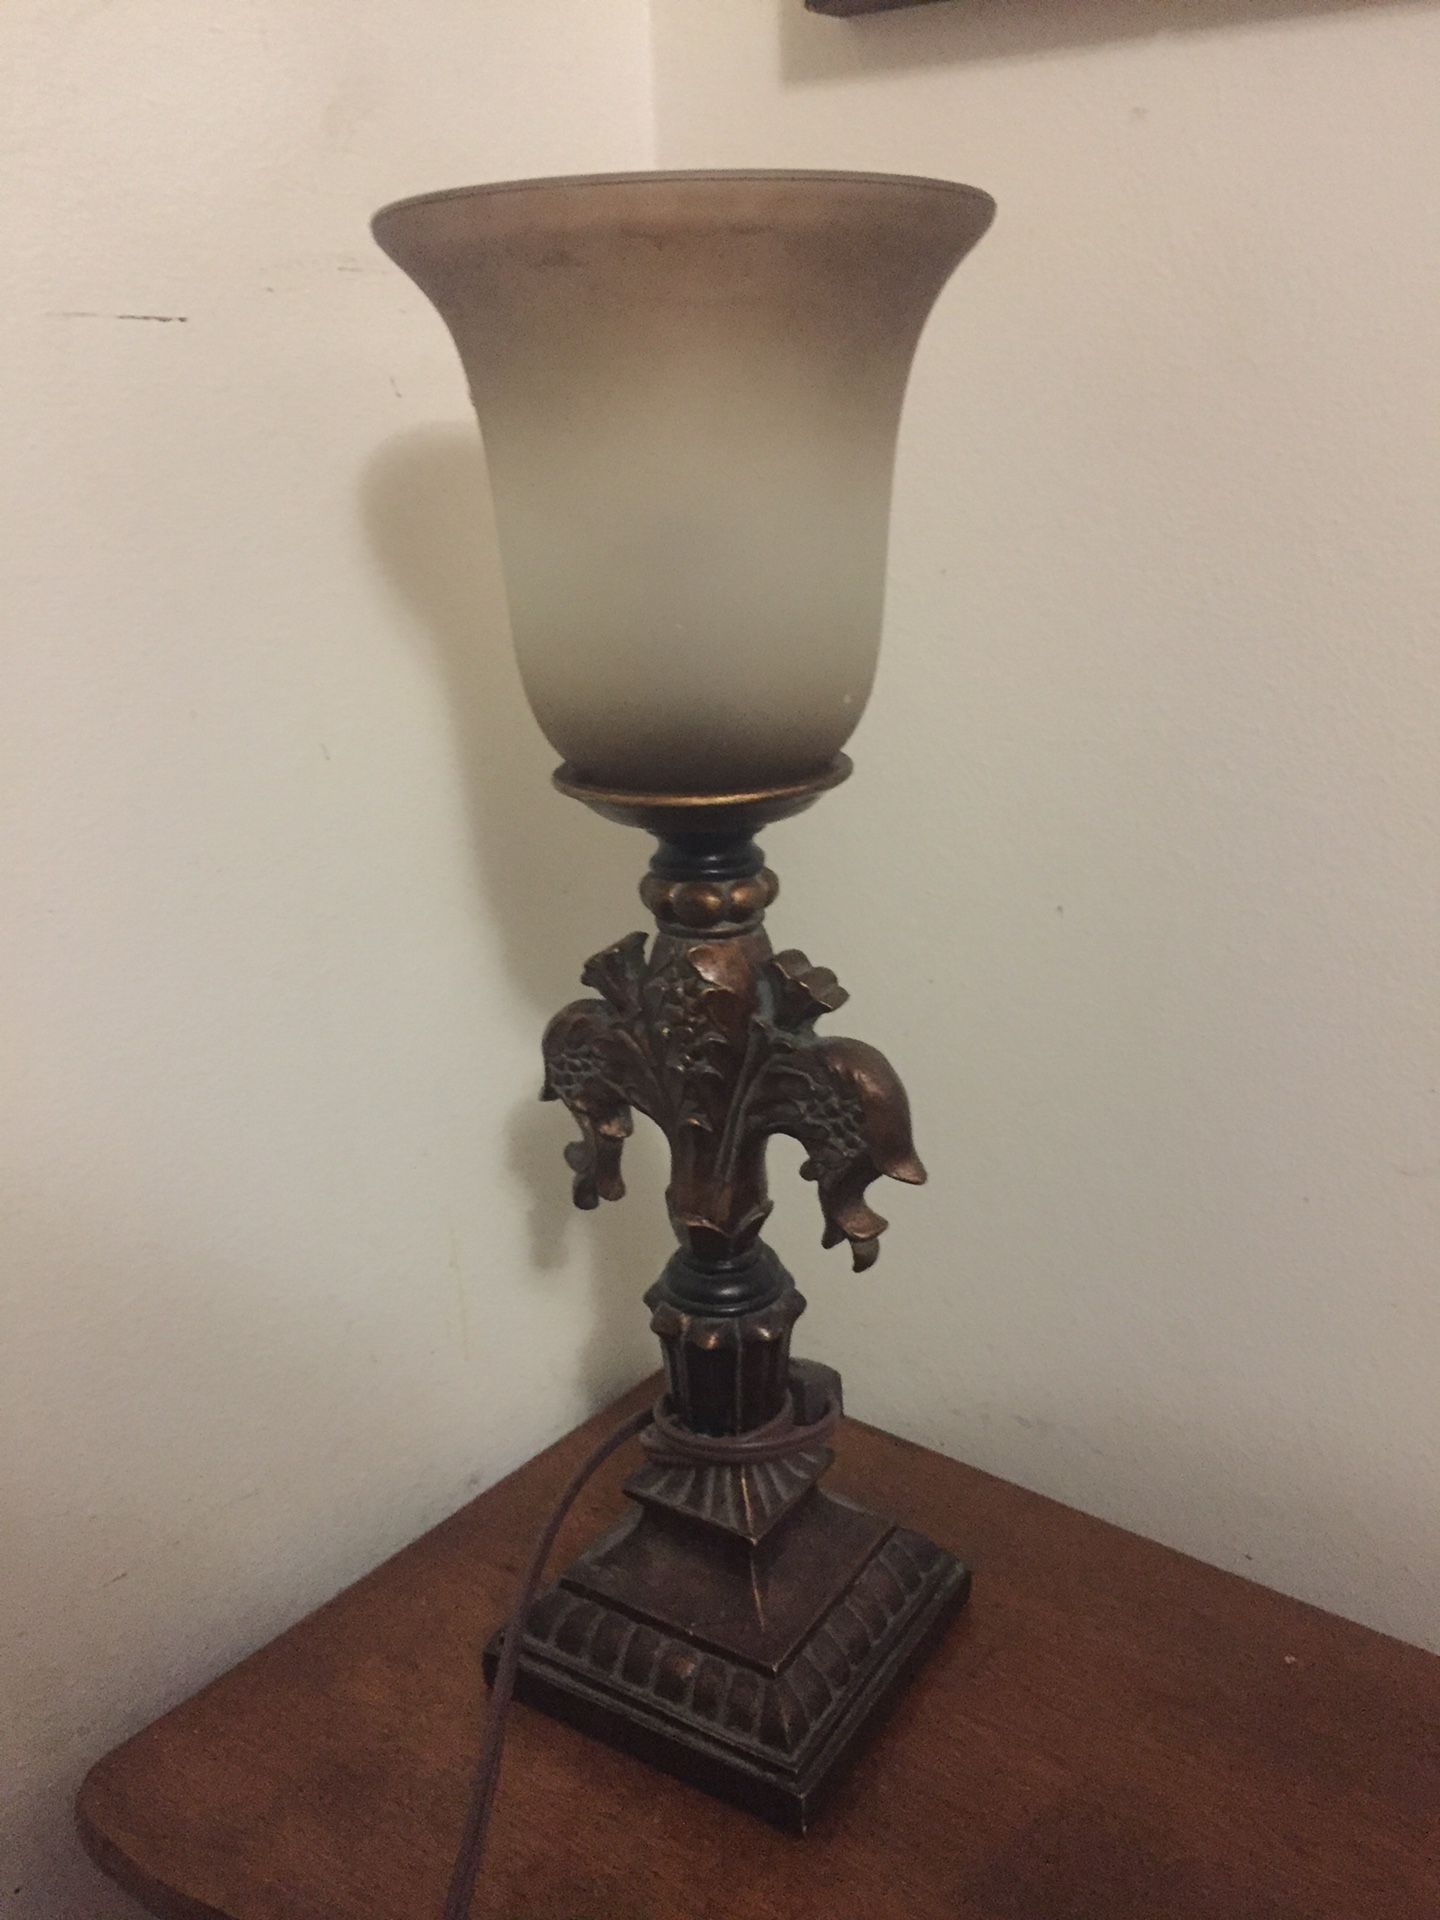 Nice heavy lamp with glass shade very sturdy